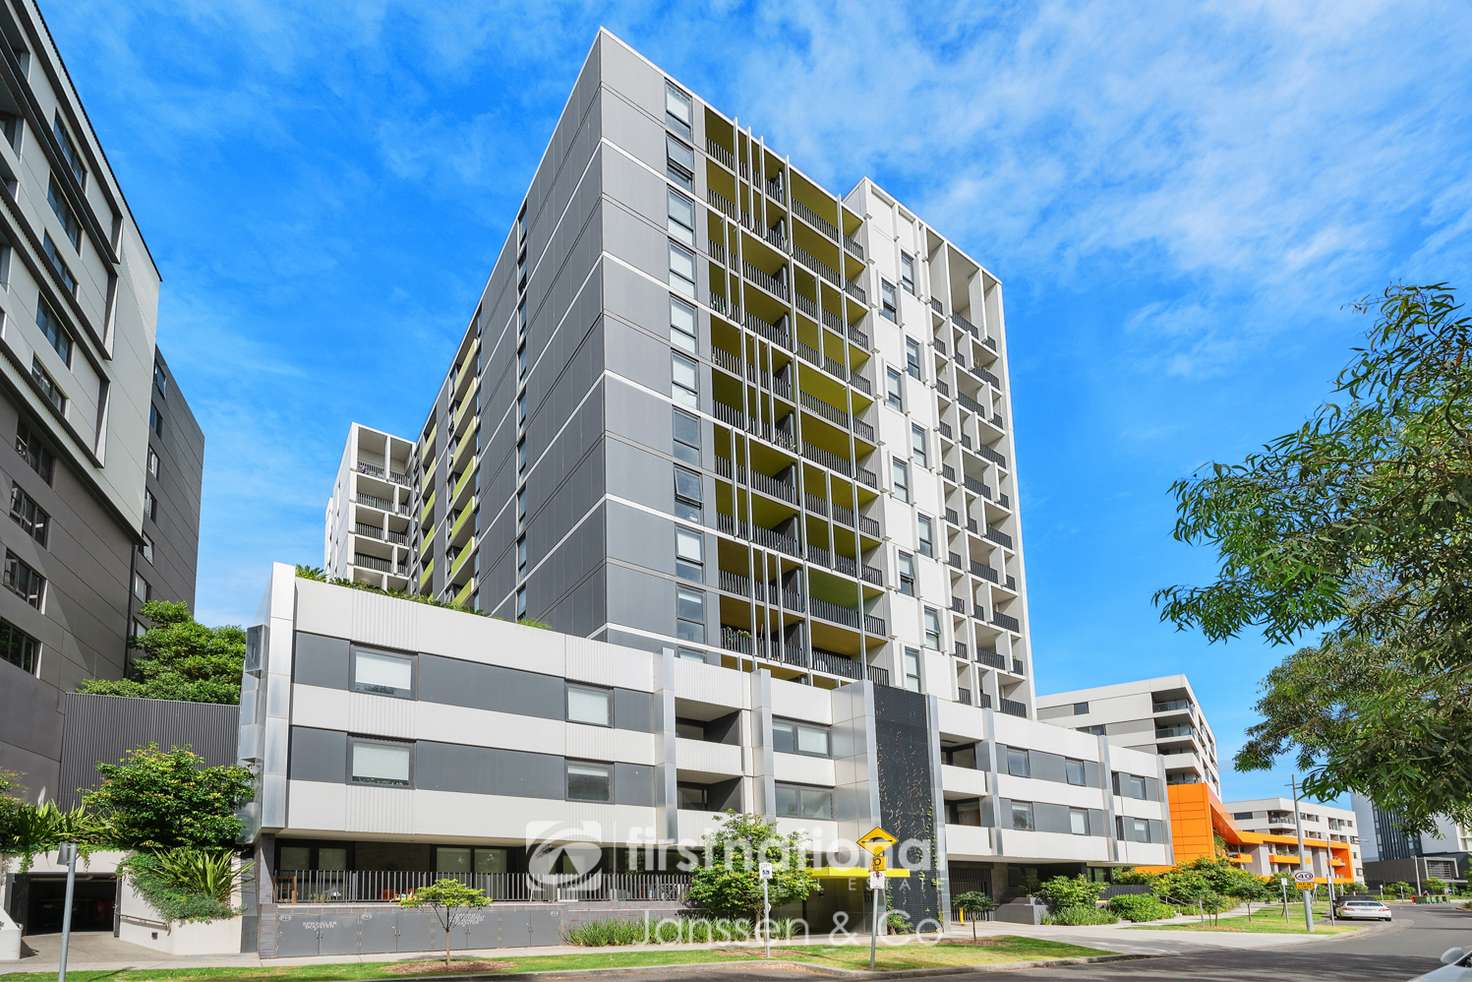 Main view of Homely apartment listing, 605/61 Galada Avenue, Parkville VIC 3052